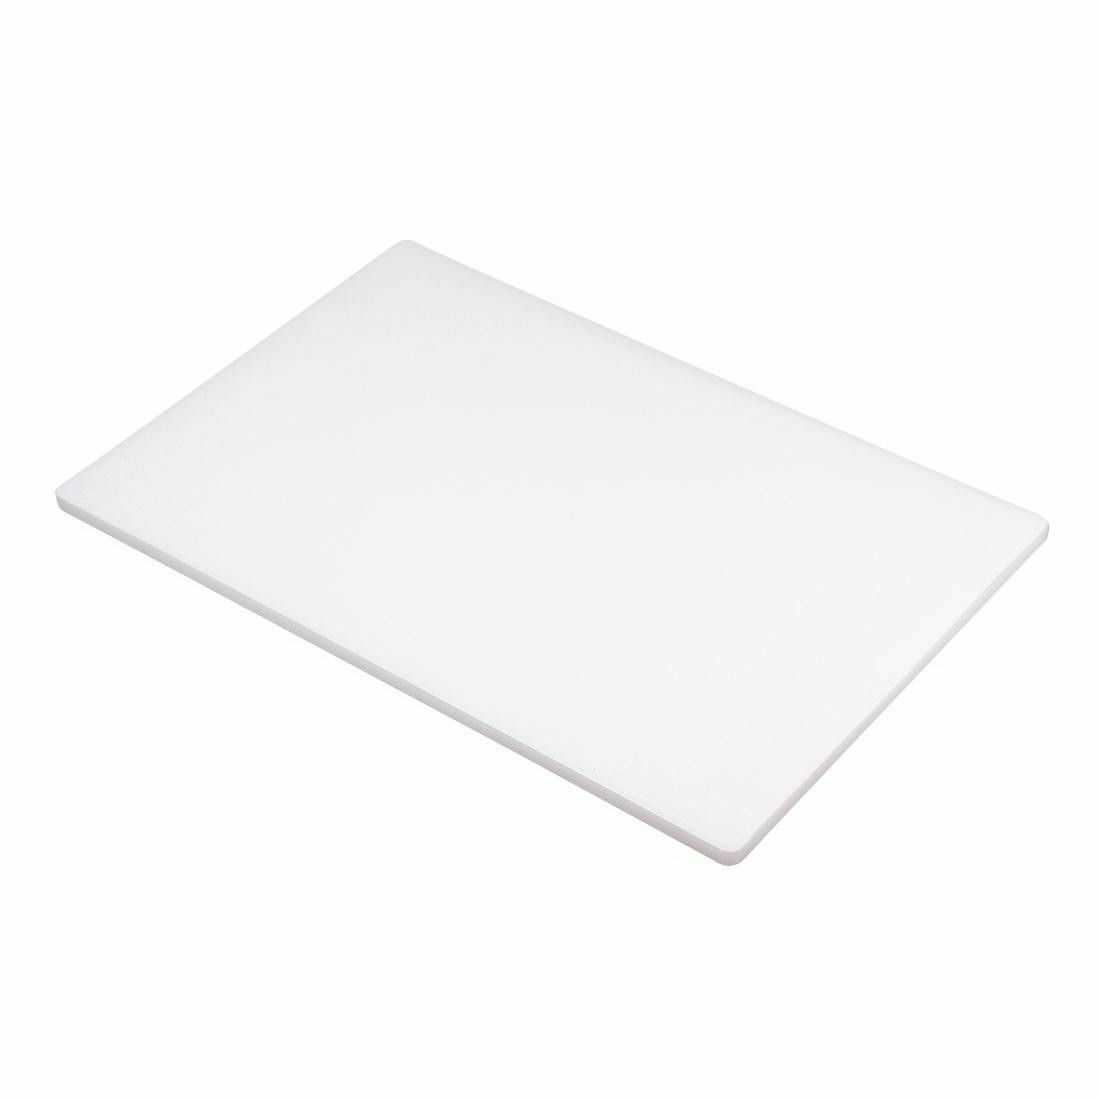 White Commercial Kitchen Chopping Board Colour Coded Hygiene Catering Food Cutting Set